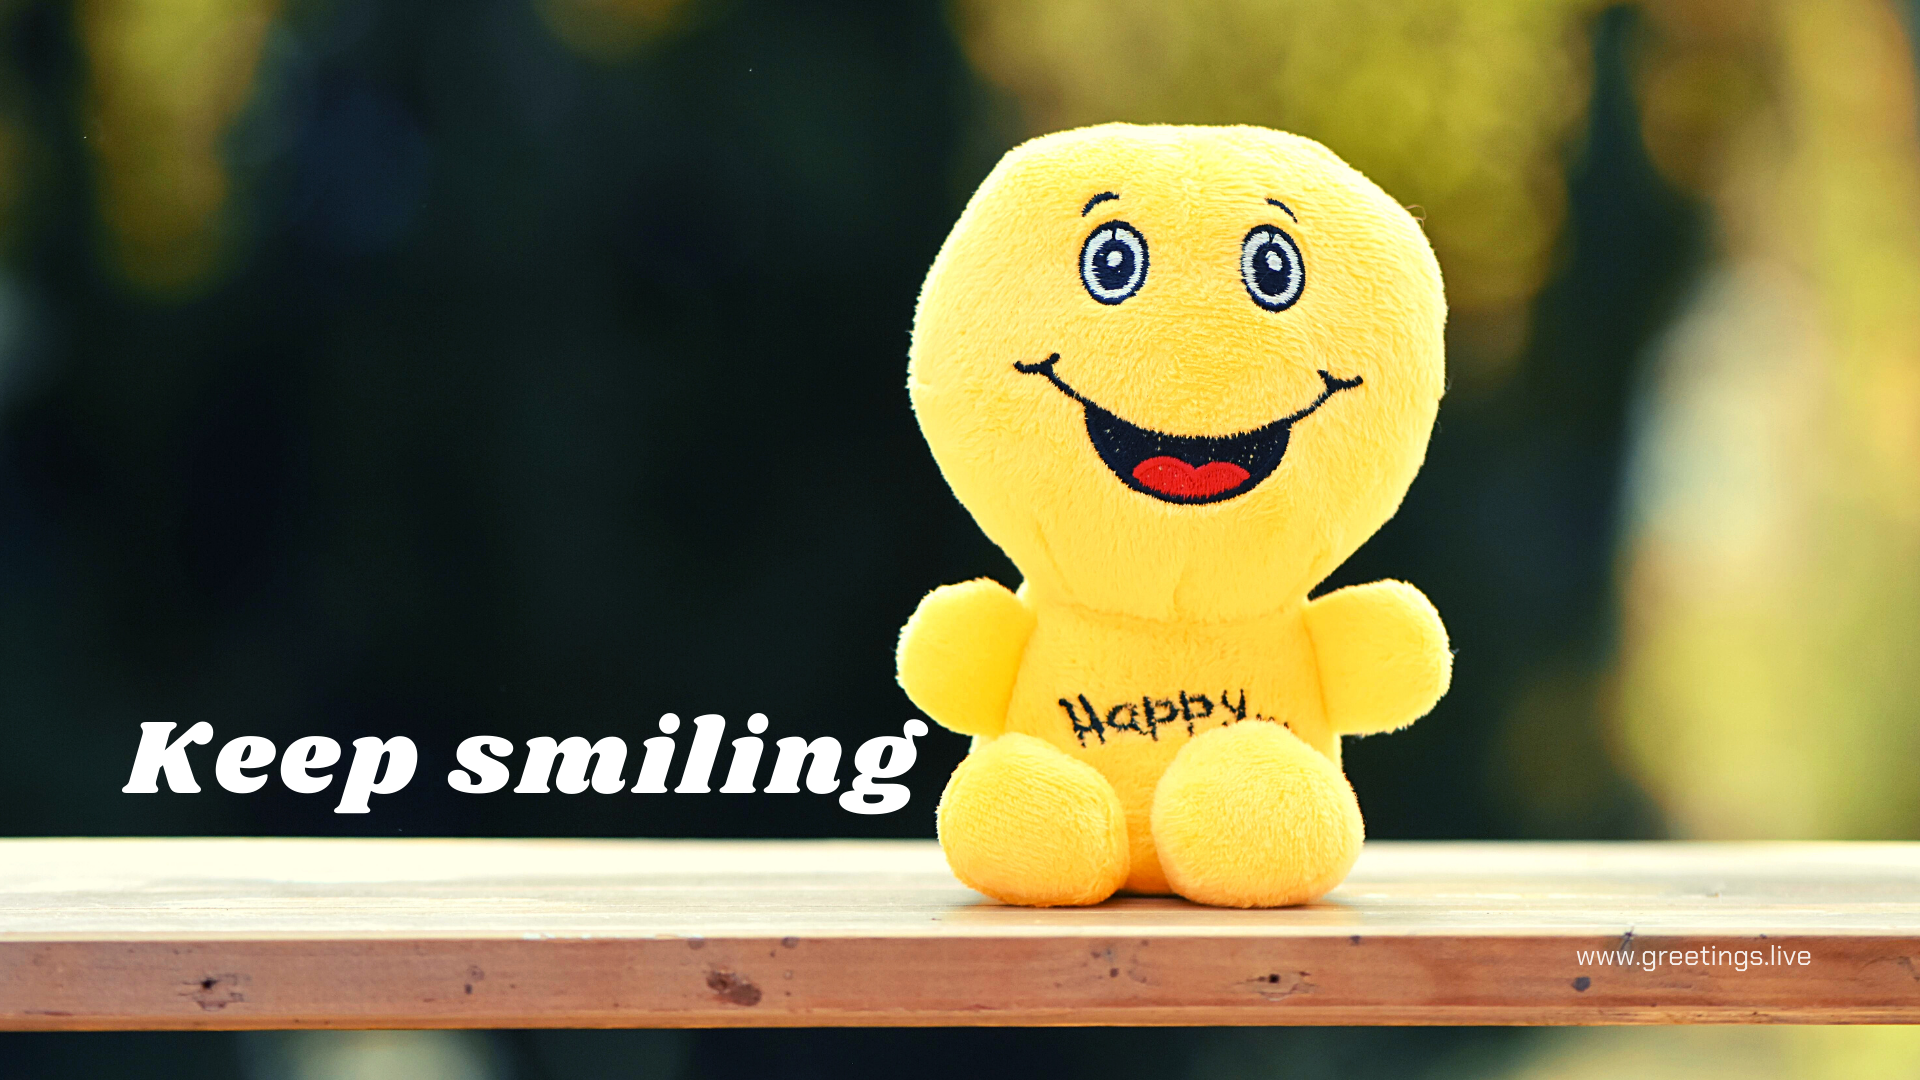 Greetings.Live*Free Daily Greetings Picture Festival GIF Image: Keep smiling image Desktop wallpaper